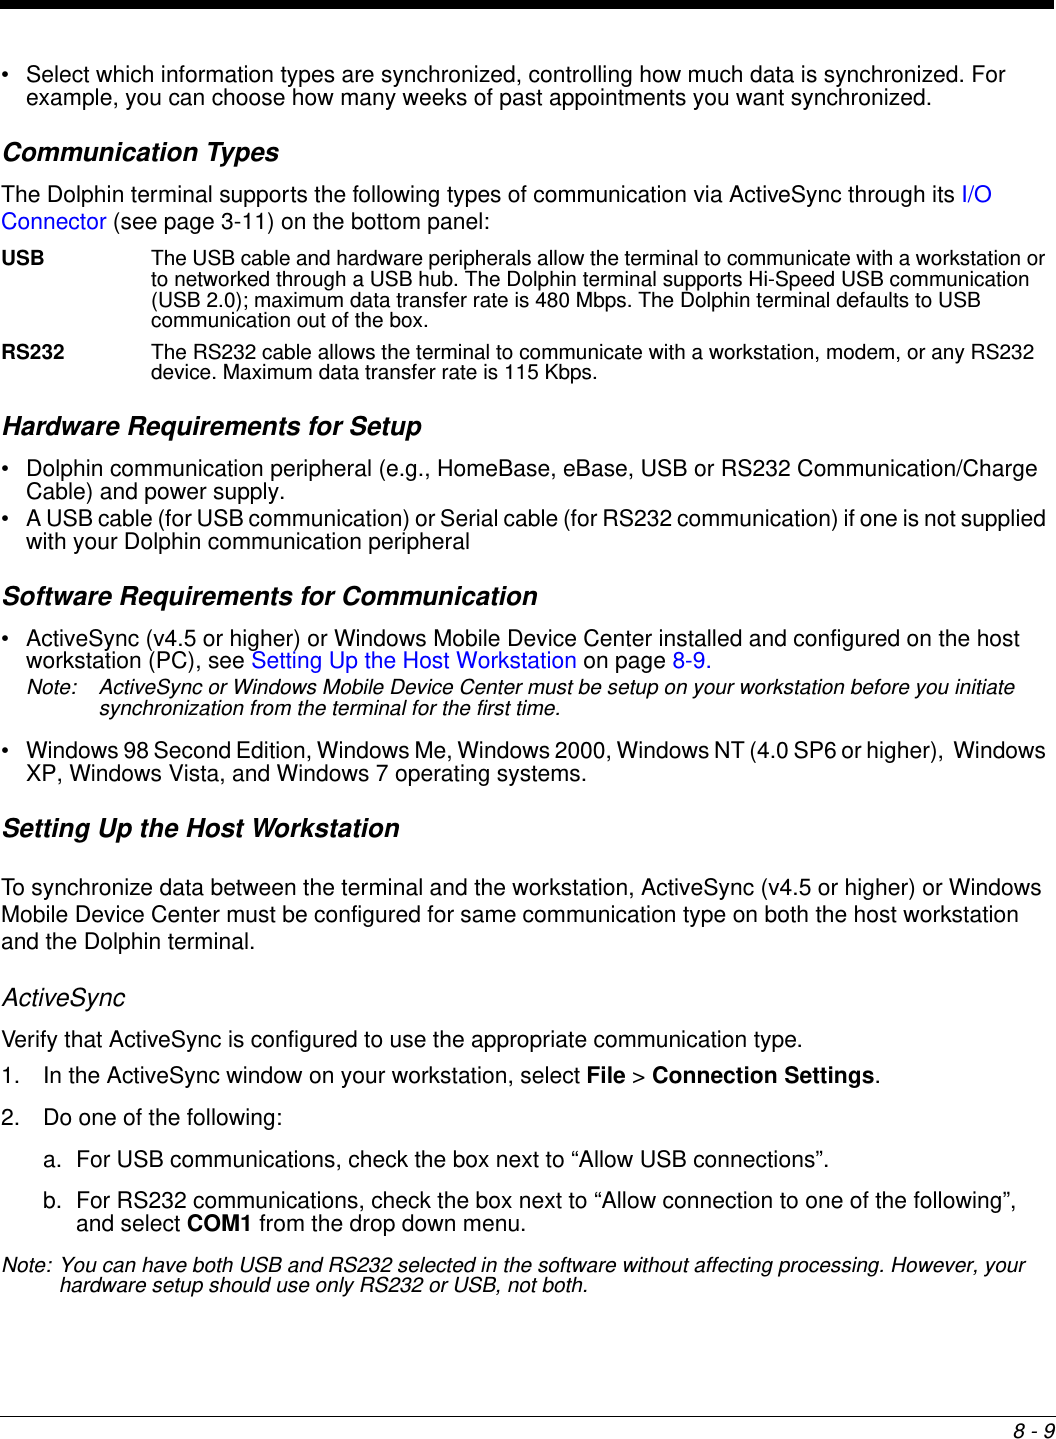 8 - 9• Select which information types are synchronized, controlling how much data is synchronized. For example, you can choose how many weeks of past appointments you want synchronized.Communication TypesThe Dolphin terminal supports the following types of communication via ActiveSync through its I/O Connector (see page 3-11) on the bottom panel:USB The USB cable and hardware peripherals allow the terminal to communicate with a workstation or to networked through a USB hub. The Dolphin terminal supports Hi-Speed USB communication (USB 2.0); maximum data transfer rate is 480 Mbps. The Dolphin terminal defaults to USB communication out of the box.RS232 The RS232 cable allows the terminal to communicate with a workstation, modem, or any RS232 device. Maximum data transfer rate is 115 Kbps.Hardware Requirements for Setup• Dolphin communication peripheral (e.g., HomeBase, eBase, USB or RS232 Communication/Charge Cable) and power supply.• A USB cable (for USB communication) or Serial cable (for RS232 communication) if one is not supplied with your Dolphin communication peripheralSoftware Requirements for Communication• ActiveSync (v4.5 or higher) or Windows Mobile Device Center installed and configured on the host workstation (PC), see Setting Up the Host Workstation on page 8-9.Note: ActiveSync or Windows Mobile Device Center must be setup on your workstation before you initiate synchronization from the terminal for the first time.• Windows 98 Second Edition, Windows Me, Windows 2000, Windows NT (4.0 SP6 or higher),  Windows XP, Windows Vista, and Windows 7 operating systems.Setting Up the Host WorkstationTo synchronize data between the terminal and the workstation, ActiveSync (v4.5 or higher) or Windows Mobile Device Center must be configured for same communication type on both the host workstation and the Dolphin terminal.ActiveSyncVerify that ActiveSync is configured to use the appropriate communication type.1. In the ActiveSync window on your workstation, select File &gt; Connection Settings.2. Do one of the following:a. For USB communications, check the box next to “Allow USB connections”.b. For RS232 communications, check the box next to “Allow connection to one of the following”, and select COM1 from the drop down menu.Note: You can have both USB and RS232 selected in the software without affecting processing. However, your hardware setup should use only RS232 or USB, not both.